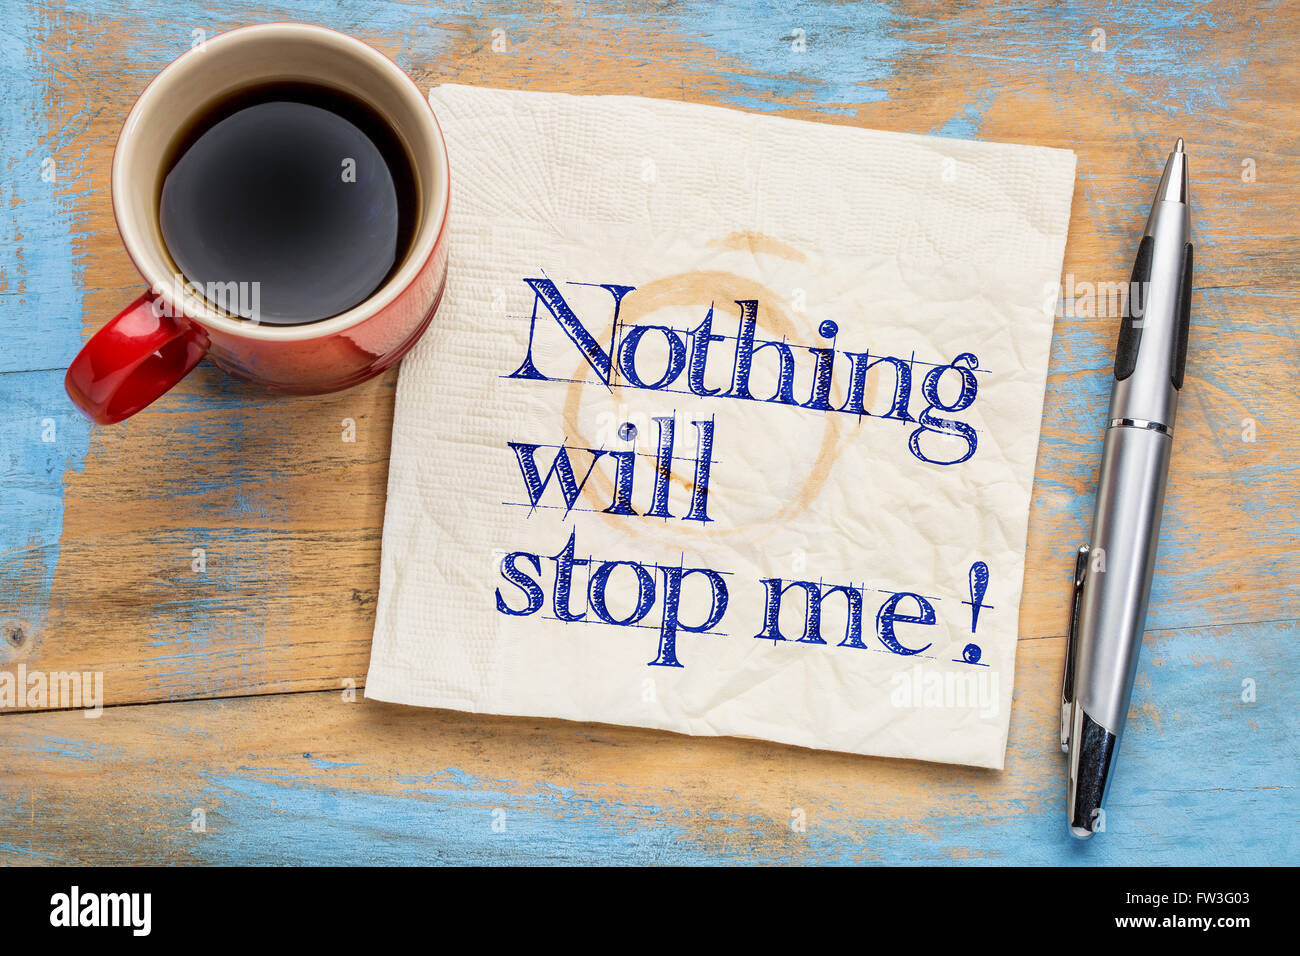 Nothing will stop me - handwriting on a napkin with a cup of coffee - determination concept Stock Photo